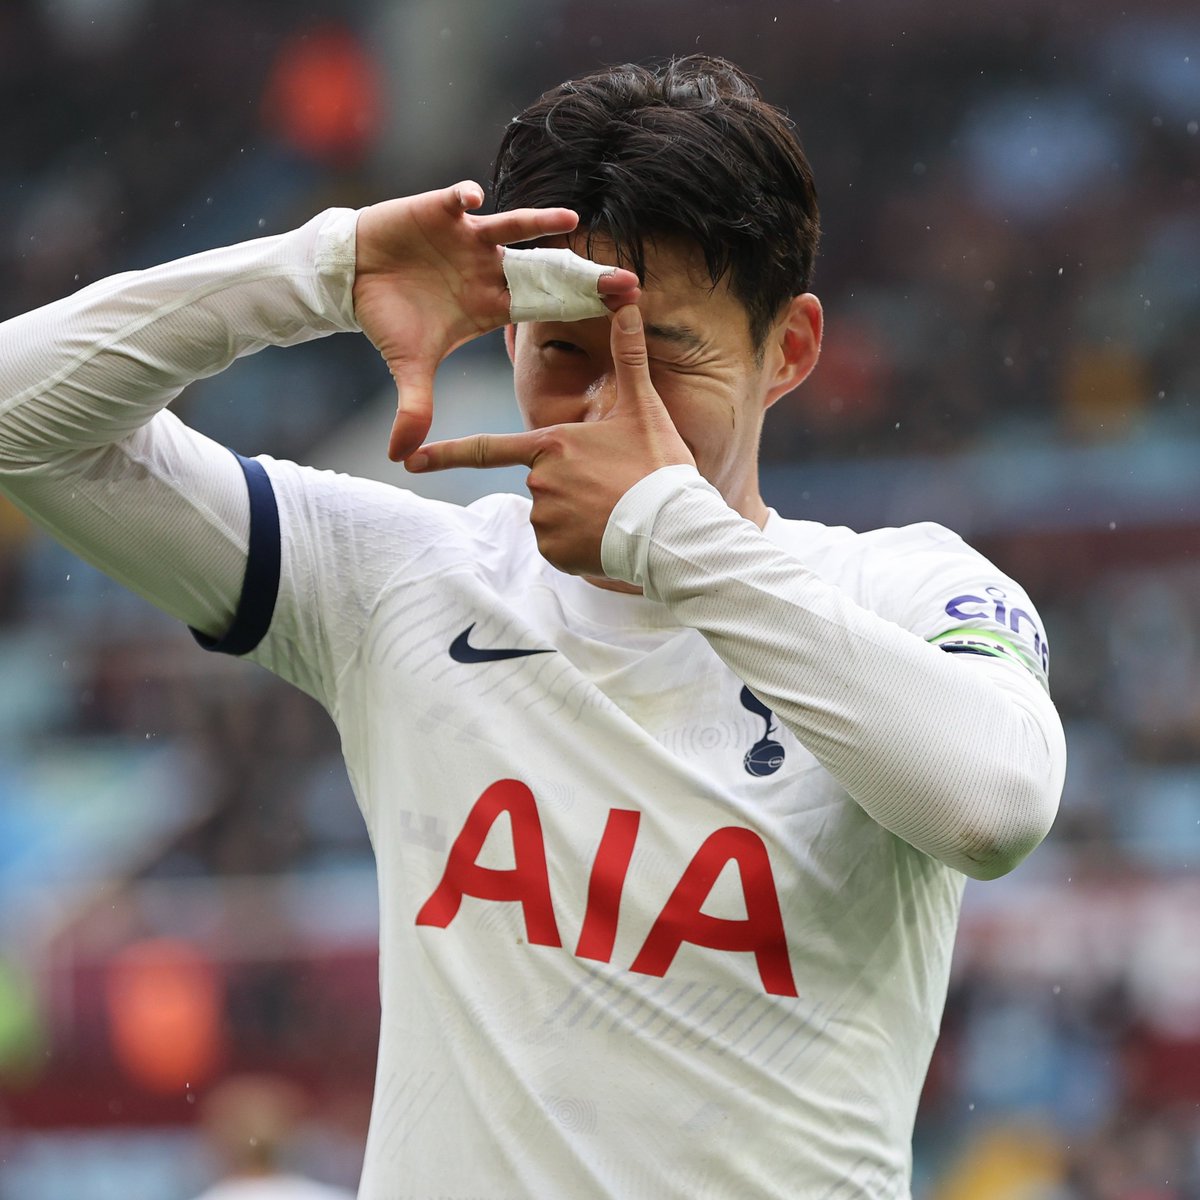 🇰🇷 Son Heung-min vs Aston Villa:

1 goal
2 shots
2 assists
2 key passes
2 big chances created
8 touches in opposition box
1 successful dribble
1 tackle
1 ball recovery
3 ground duels won
9.35 WS rating
Player of the Match

Nice one Sonny. 👏

#AVLTOT